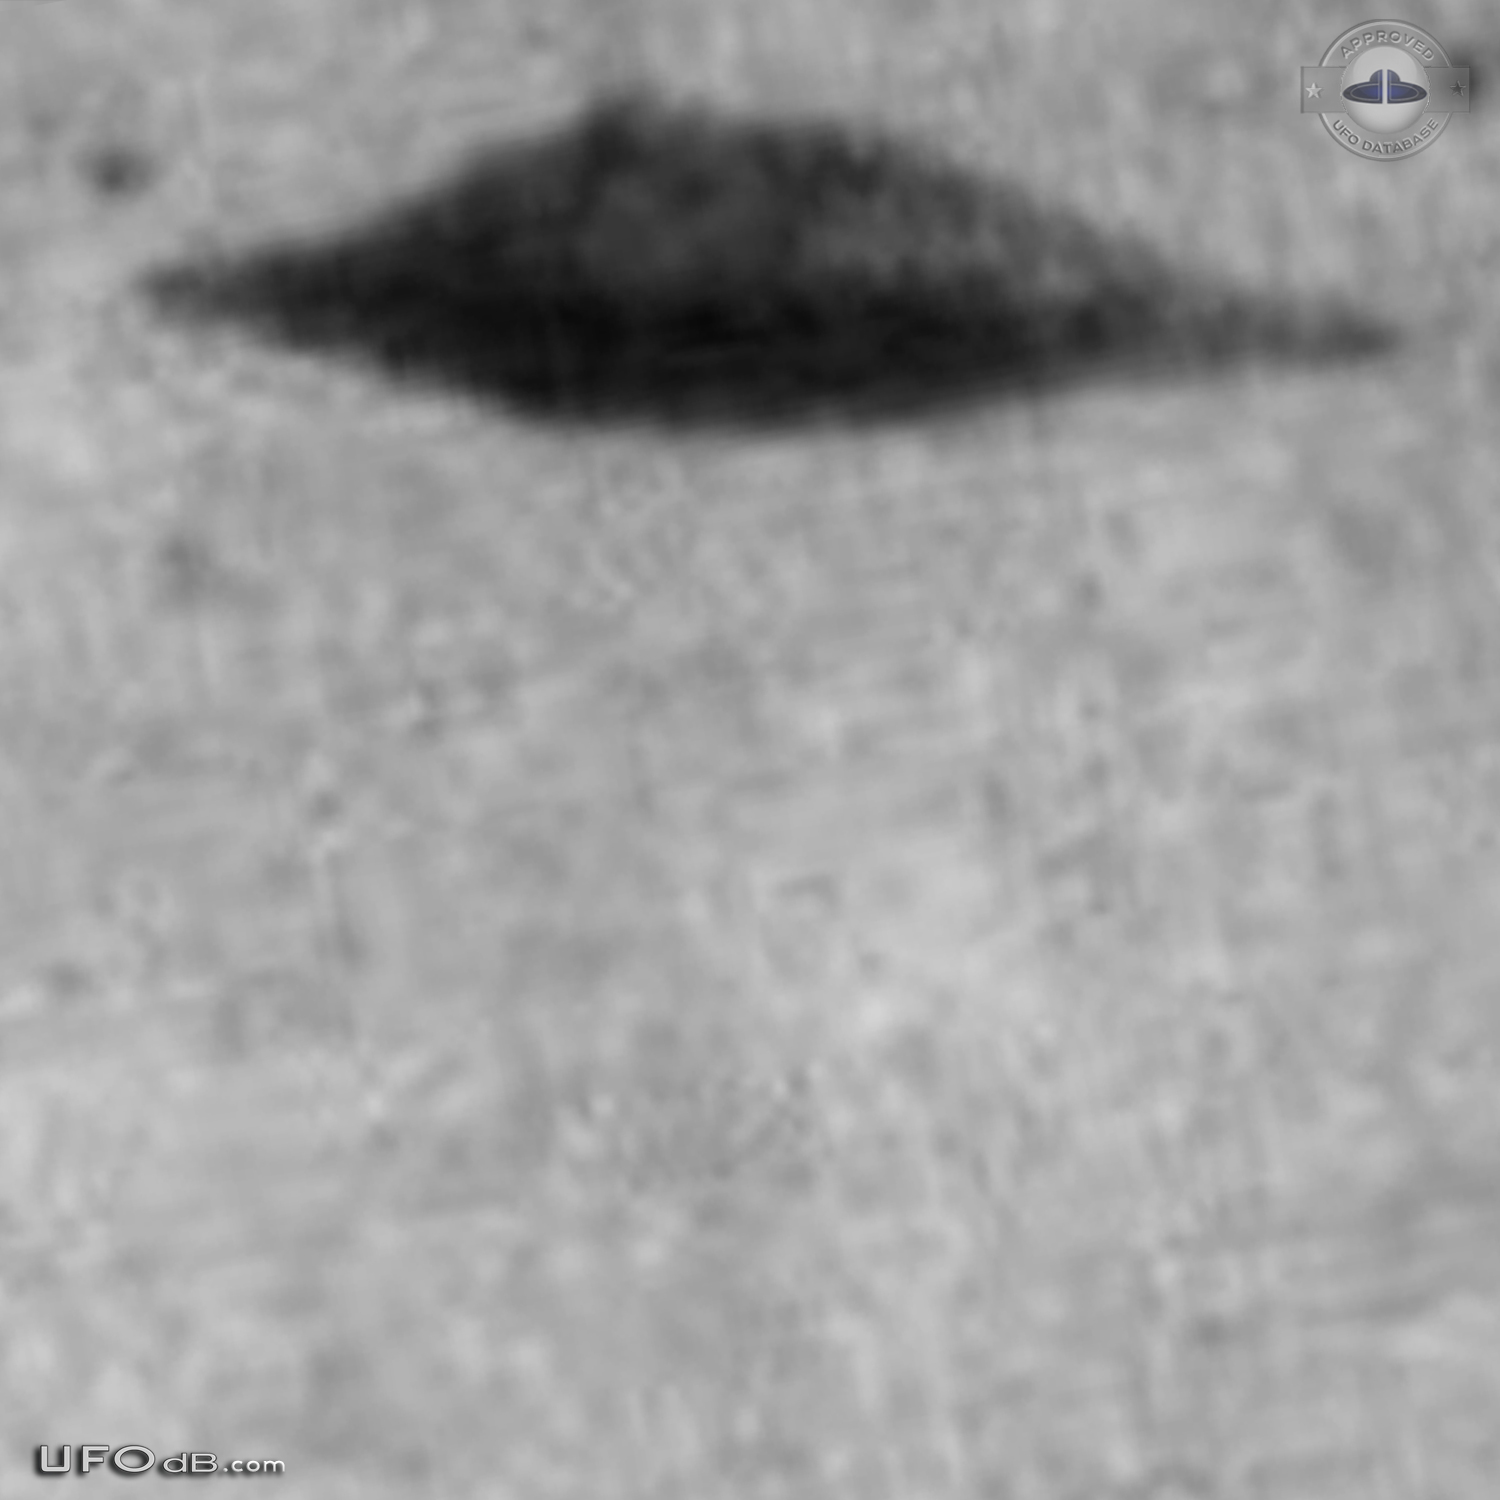 Old 1978 double Saucer UFO picture from Renalegh, Buenos Aires UFO Picture #491-5